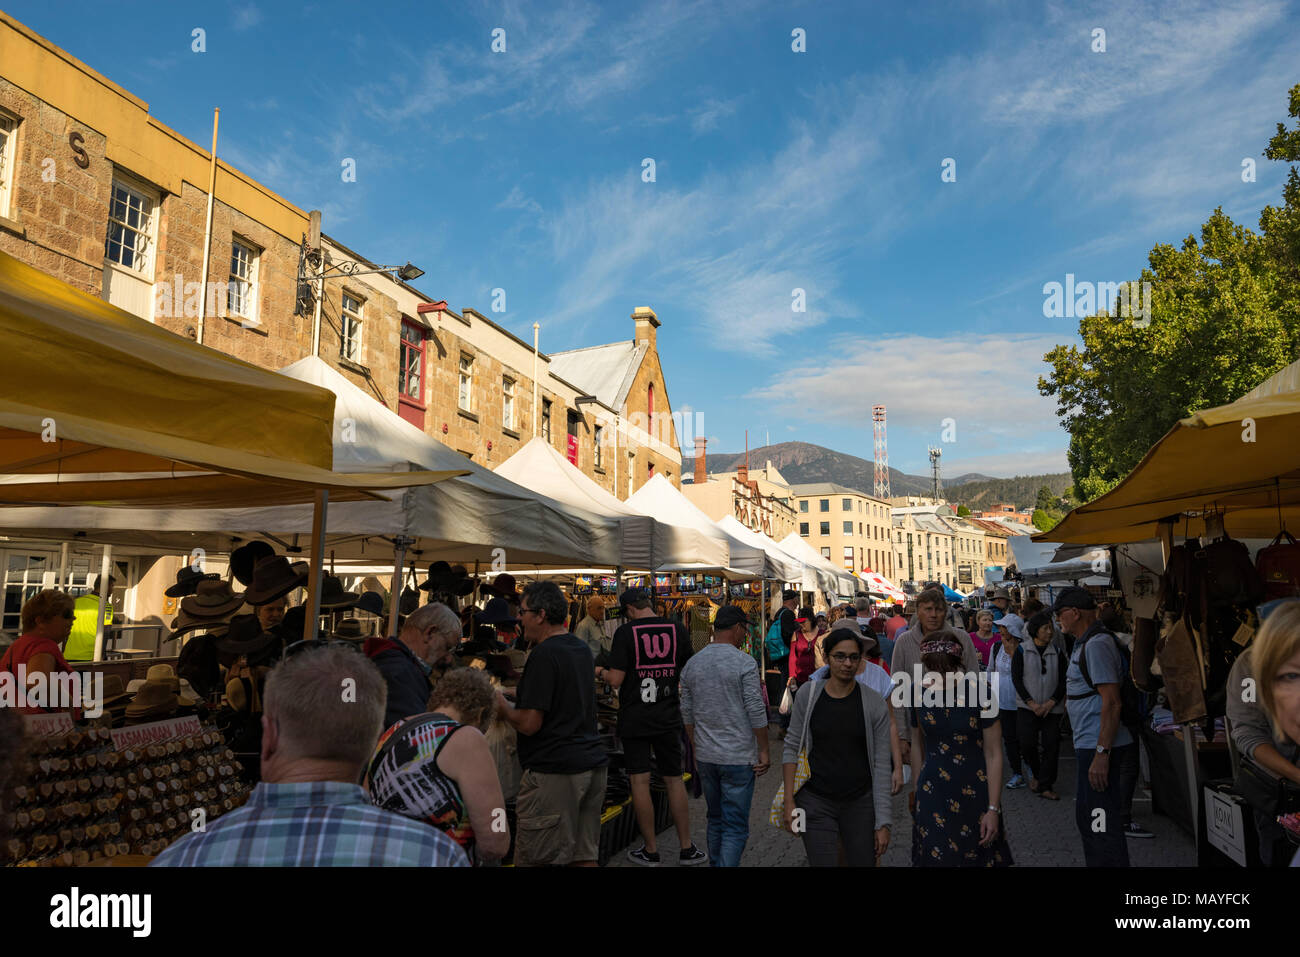 Salamanca Market with stalls in front of the old waterfront sandstone buildings in Hobart, Tasmania Stock Photo